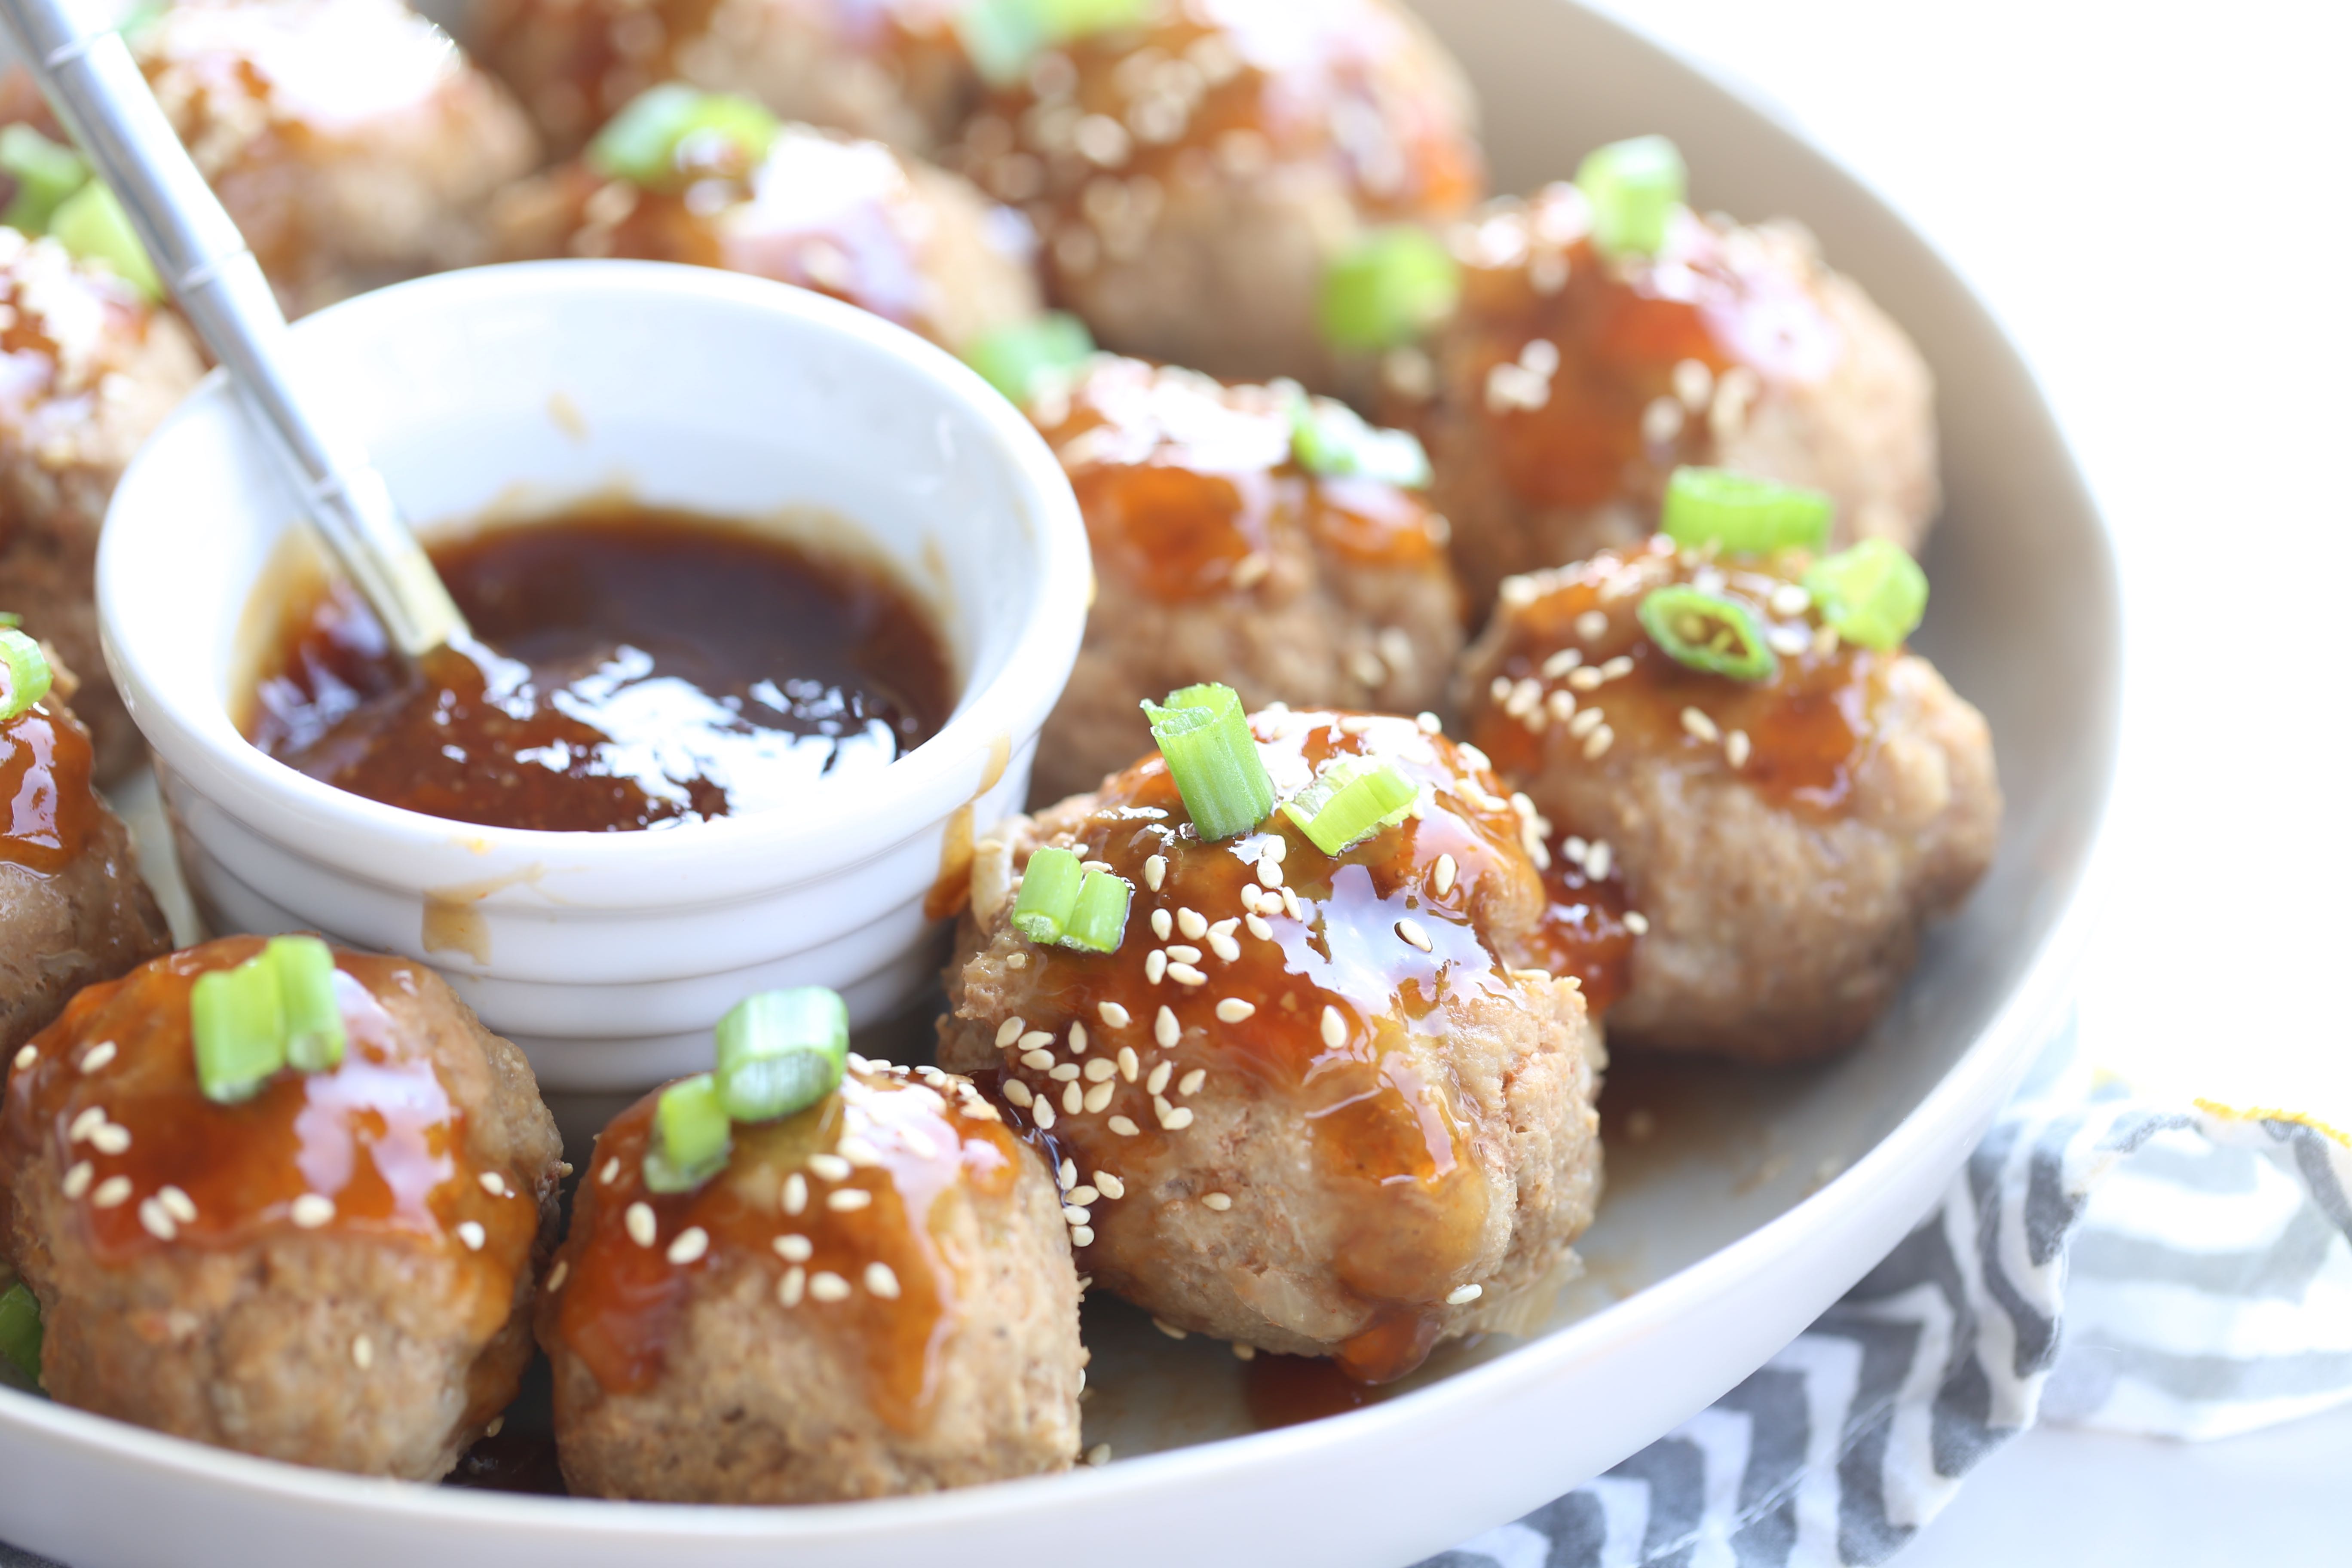 Grain Free Instant Pot Asian Sweet and Sour Turkey Meatballs